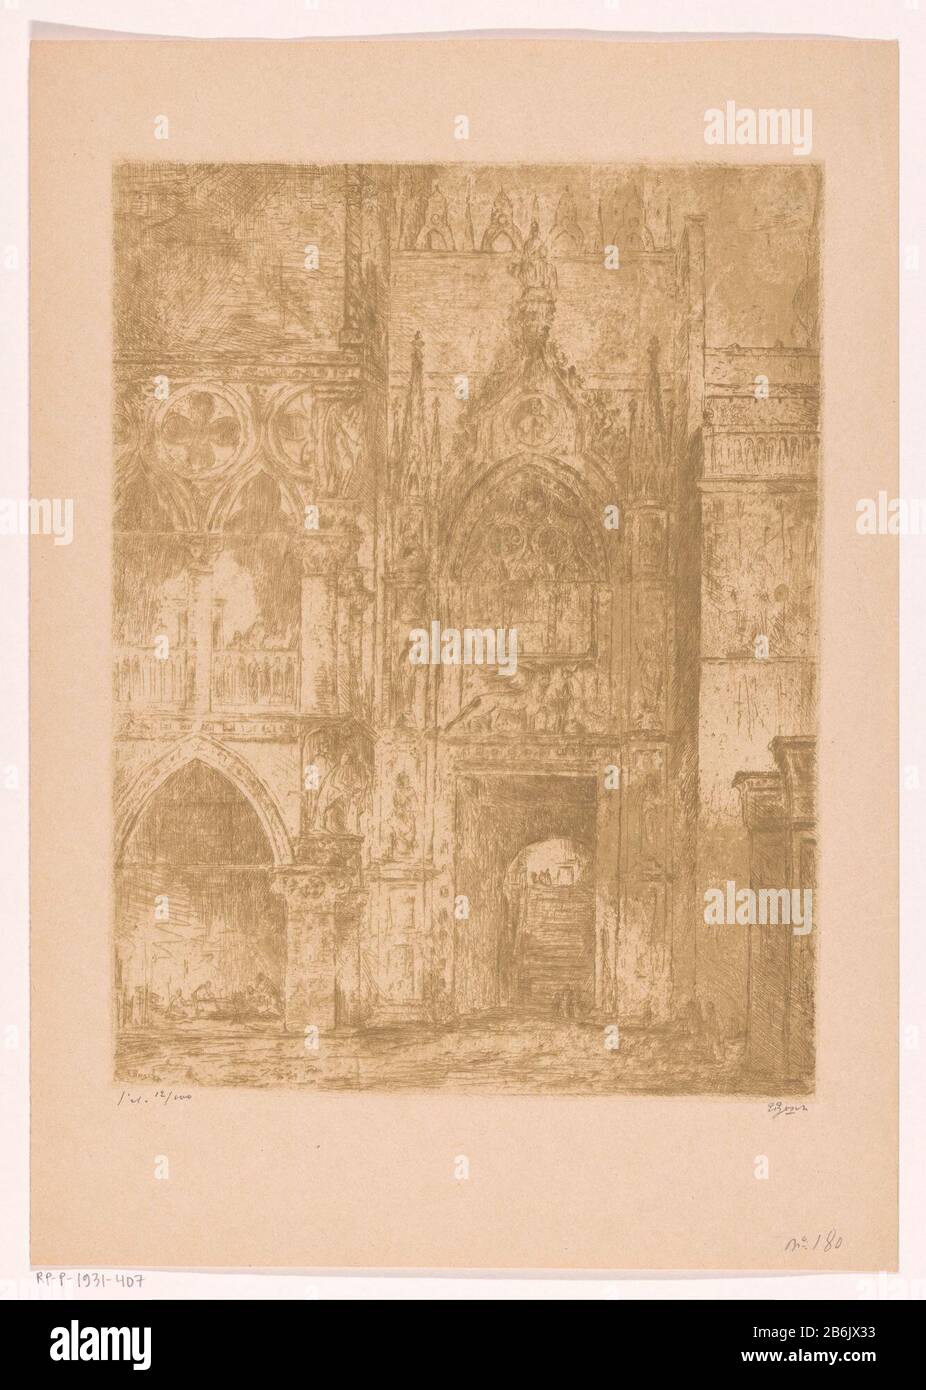 View of the Porta della Carta of the Doge's Palace in Venice. At the gate a sculpture of the evangelist Mark and winged leeuw. Manufacturer : printmaker: Etienne Bosch (personally signed) Date: 1873 - 1931 Physical features: etching in brown material: paper Technique: etching Dimensions: plate edge: H 378 mm × W 286 mm Subject: gate, entrance mark (mark) the evangelist, and bishop of Alexandria; possible attributes: book, (winged) lion, pen and inkhorn, scrolling in which: Dogepaleis Stock Photo